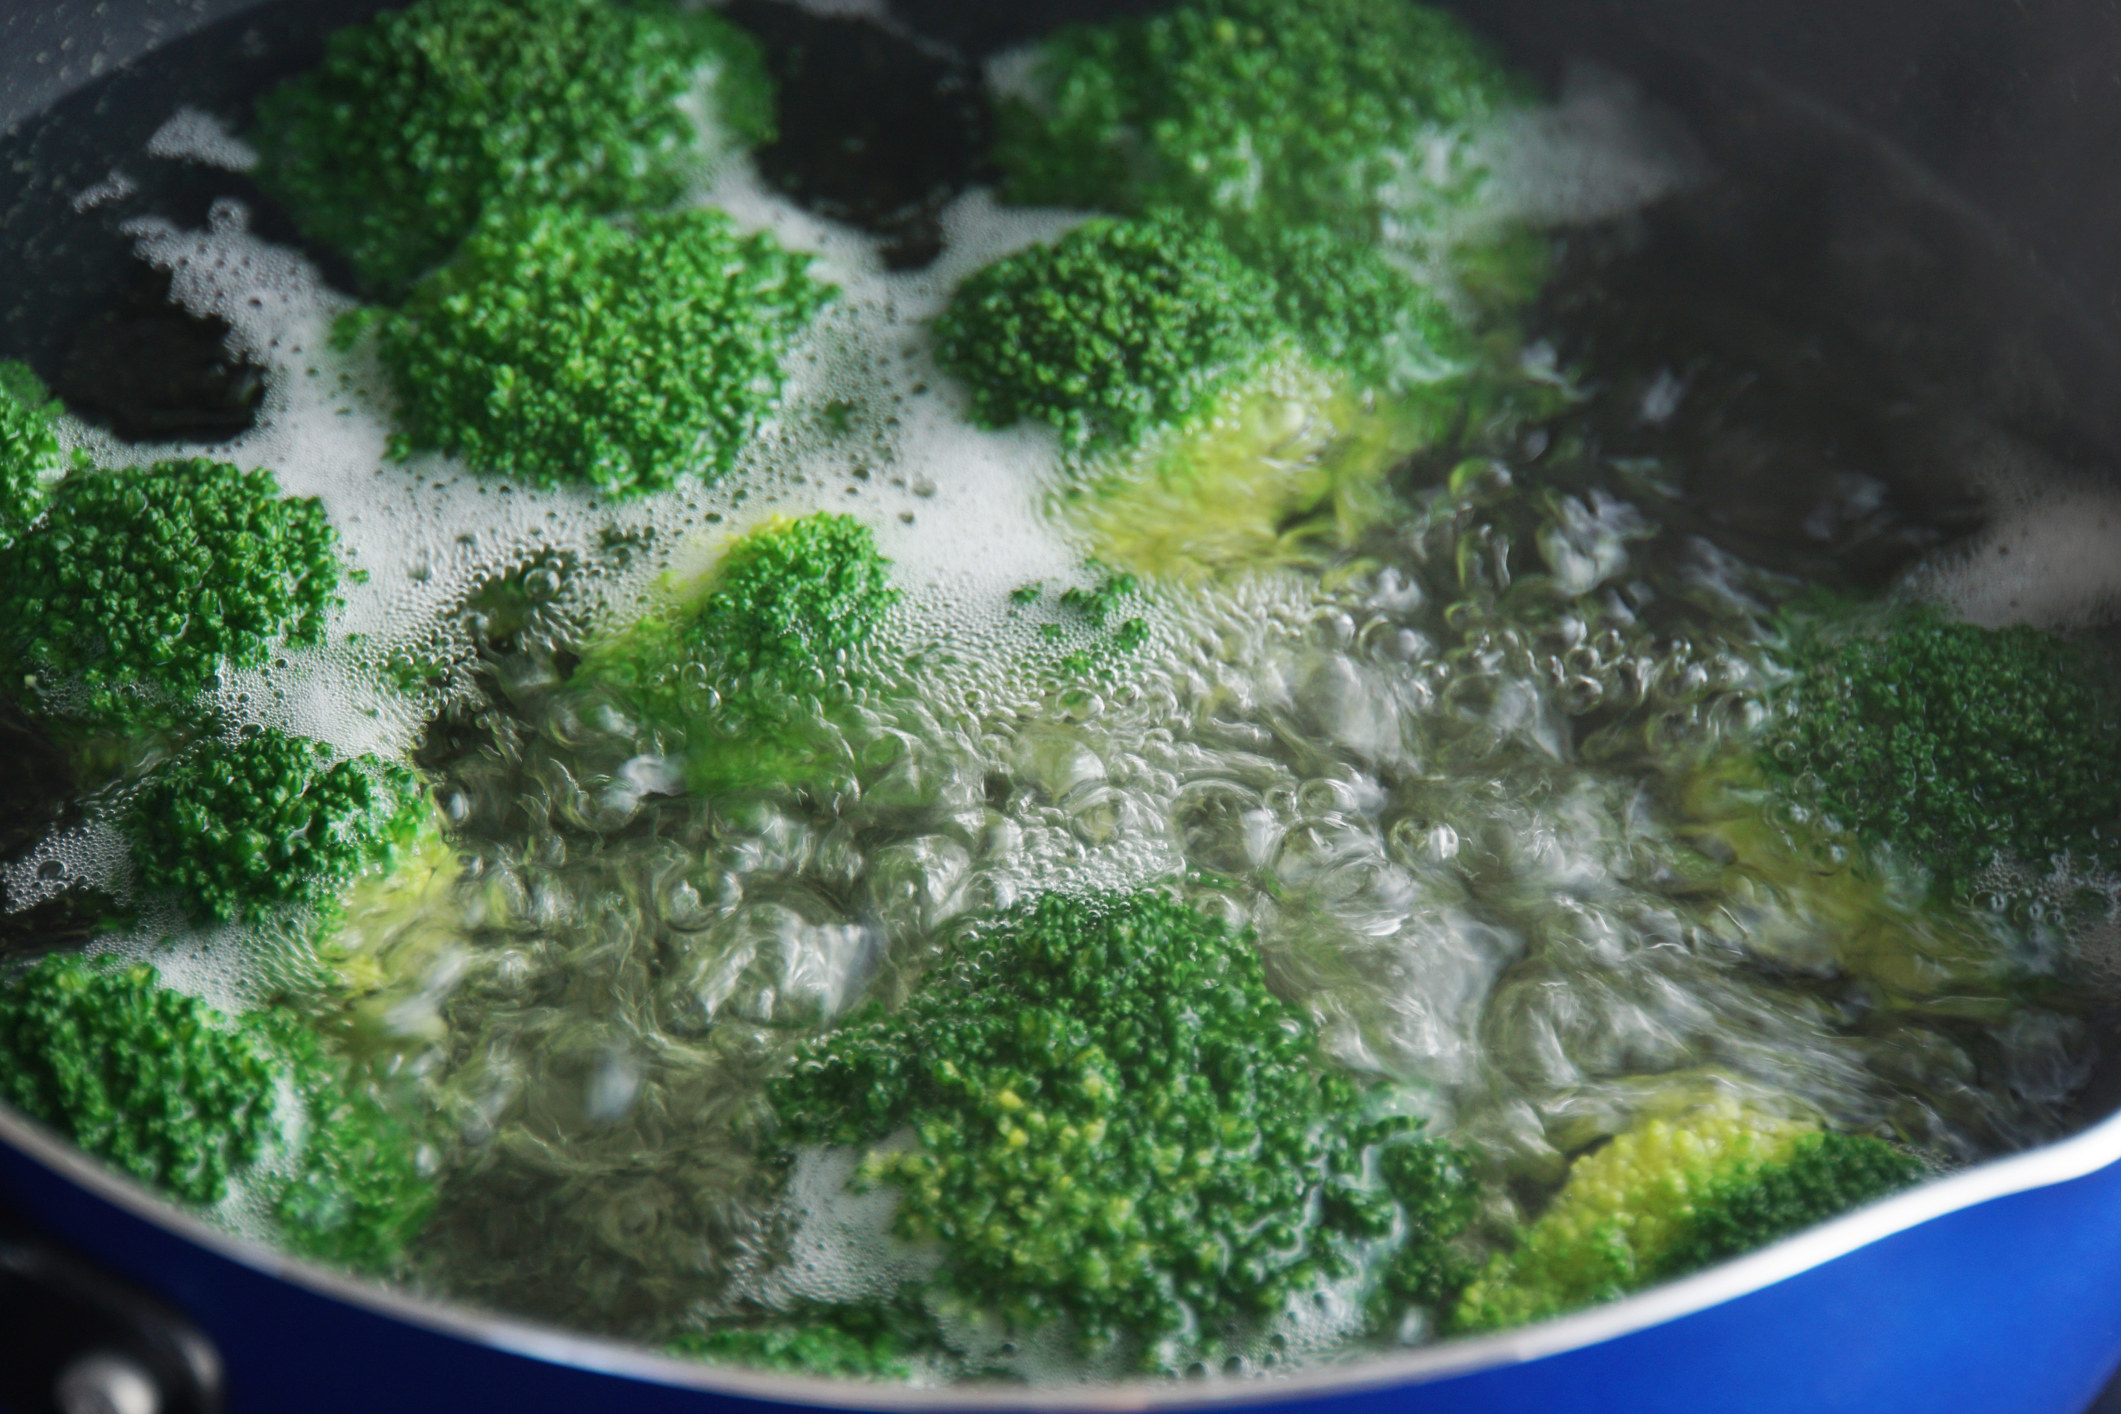 Broccoli boiling in water.